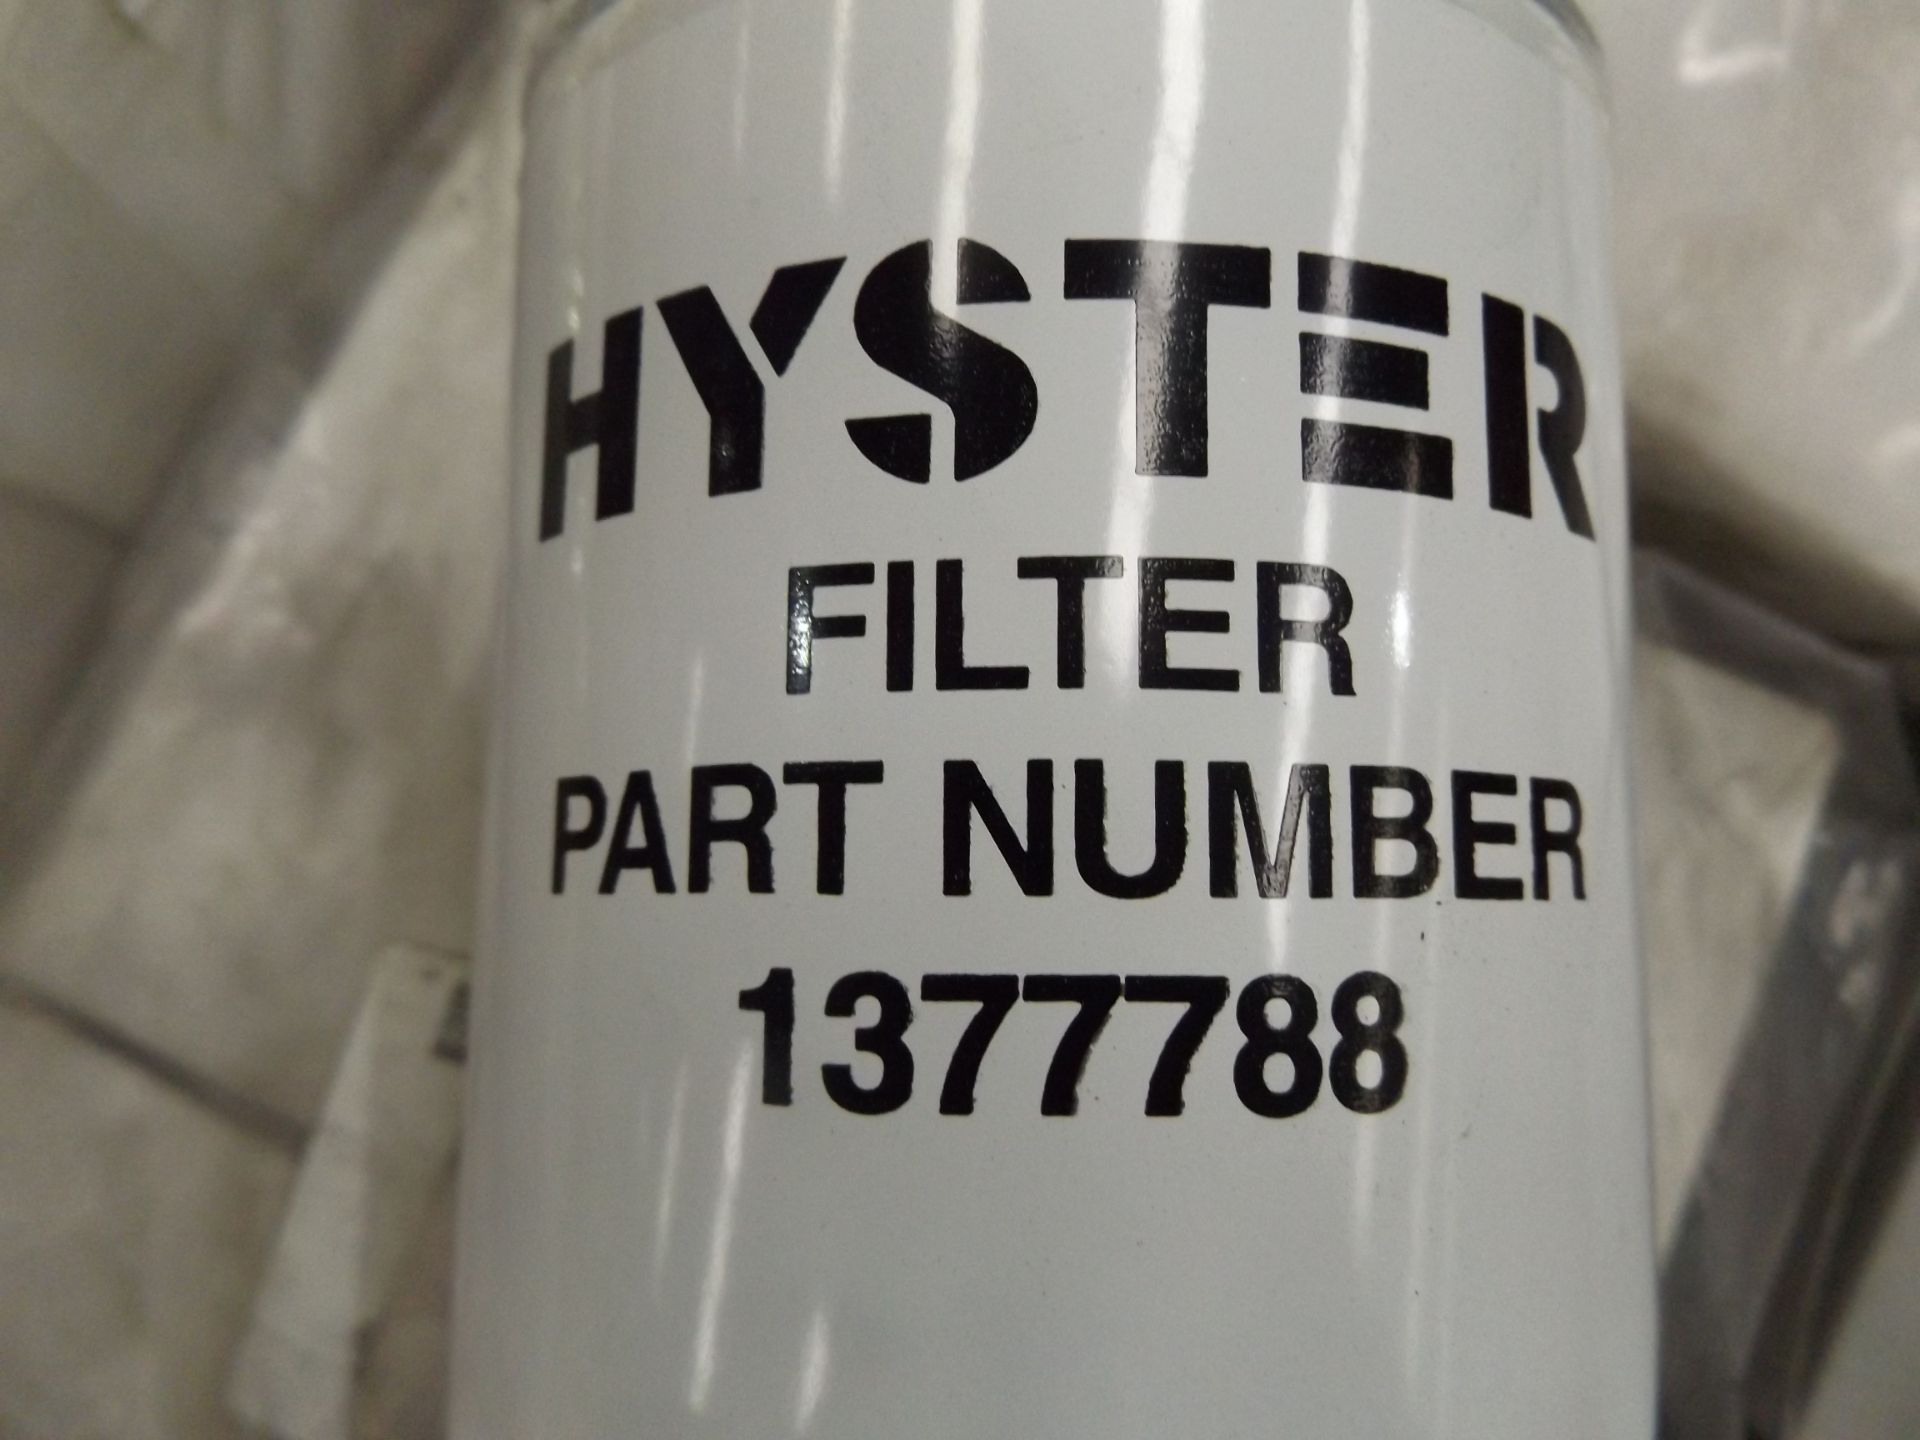 Approx 50 x Hyster Oil Filters P/No 1377788 - Image 2 of 4